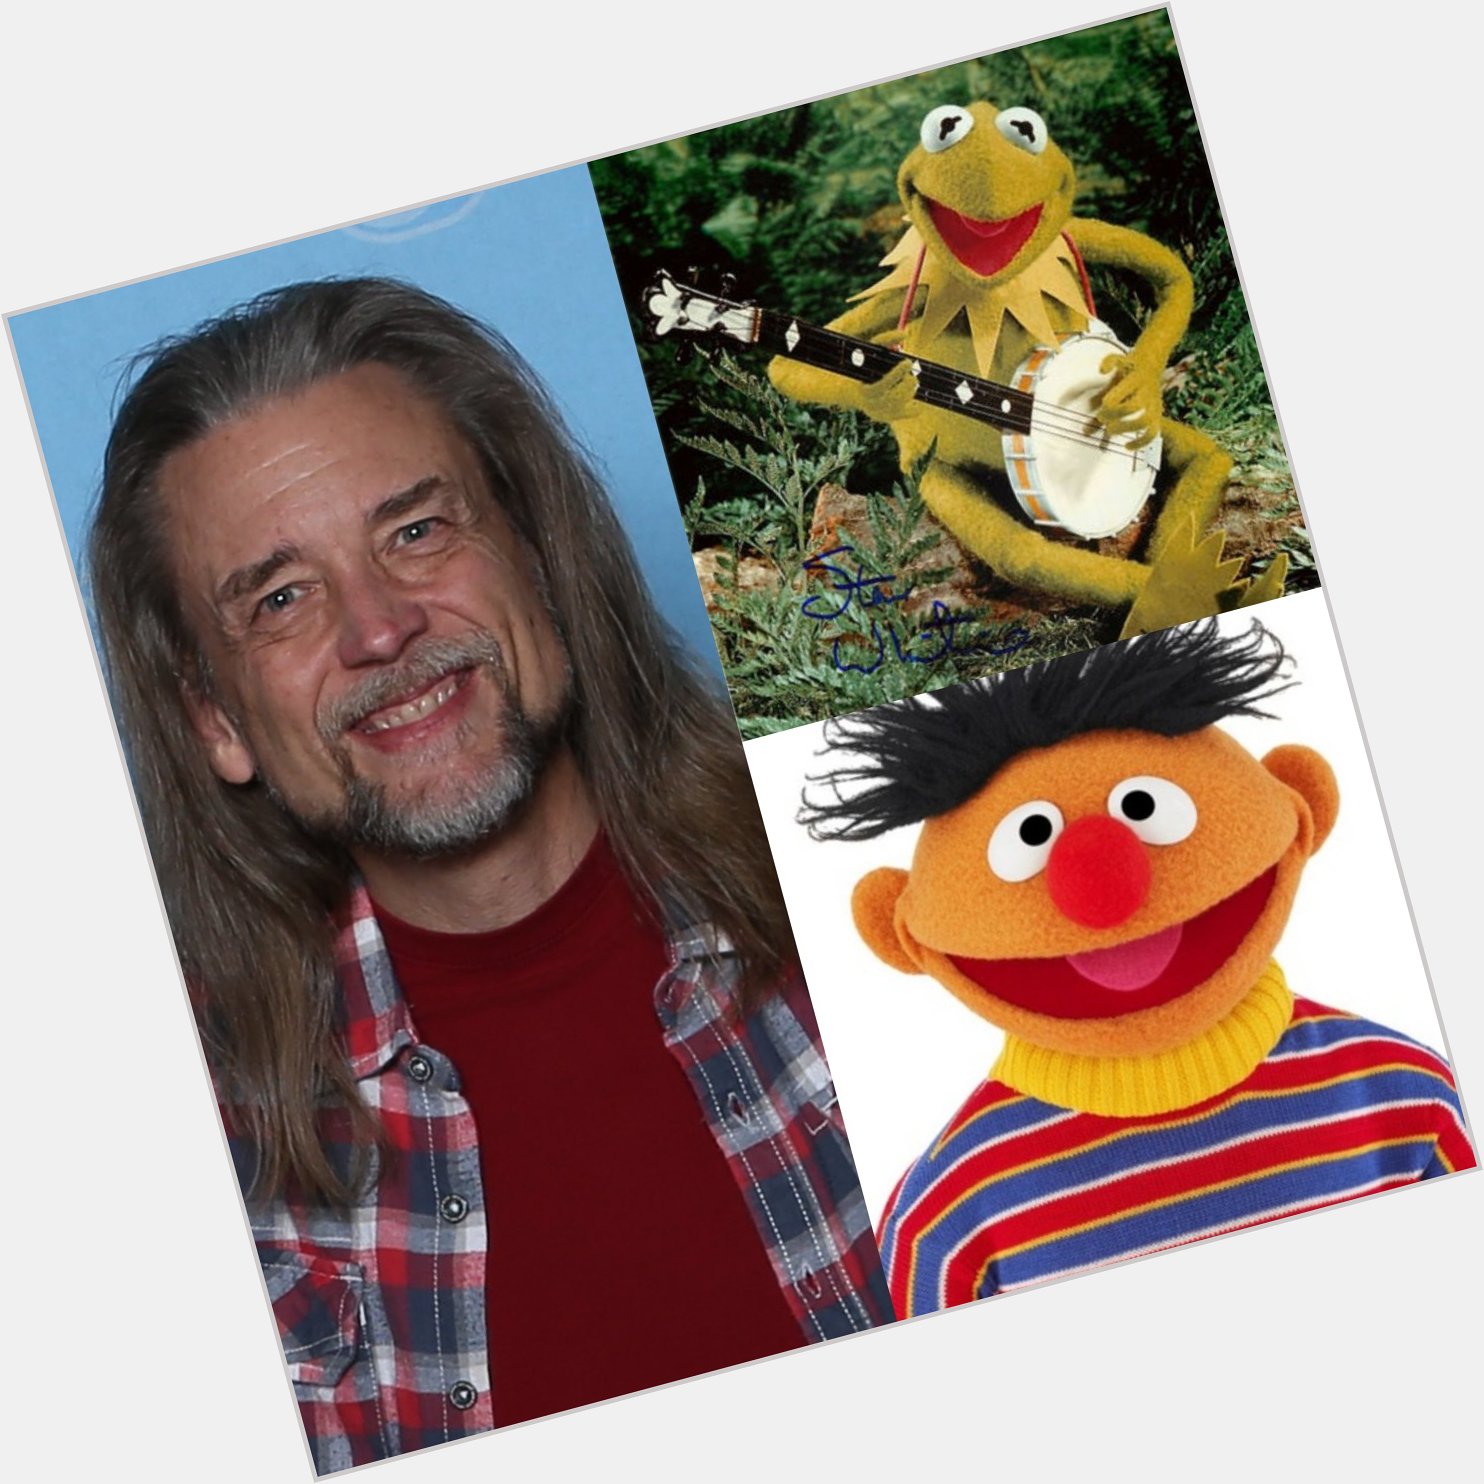  Happy birthday to Jim Henson. And to Steve Whitmire, one of the other Muppet voice roles. 